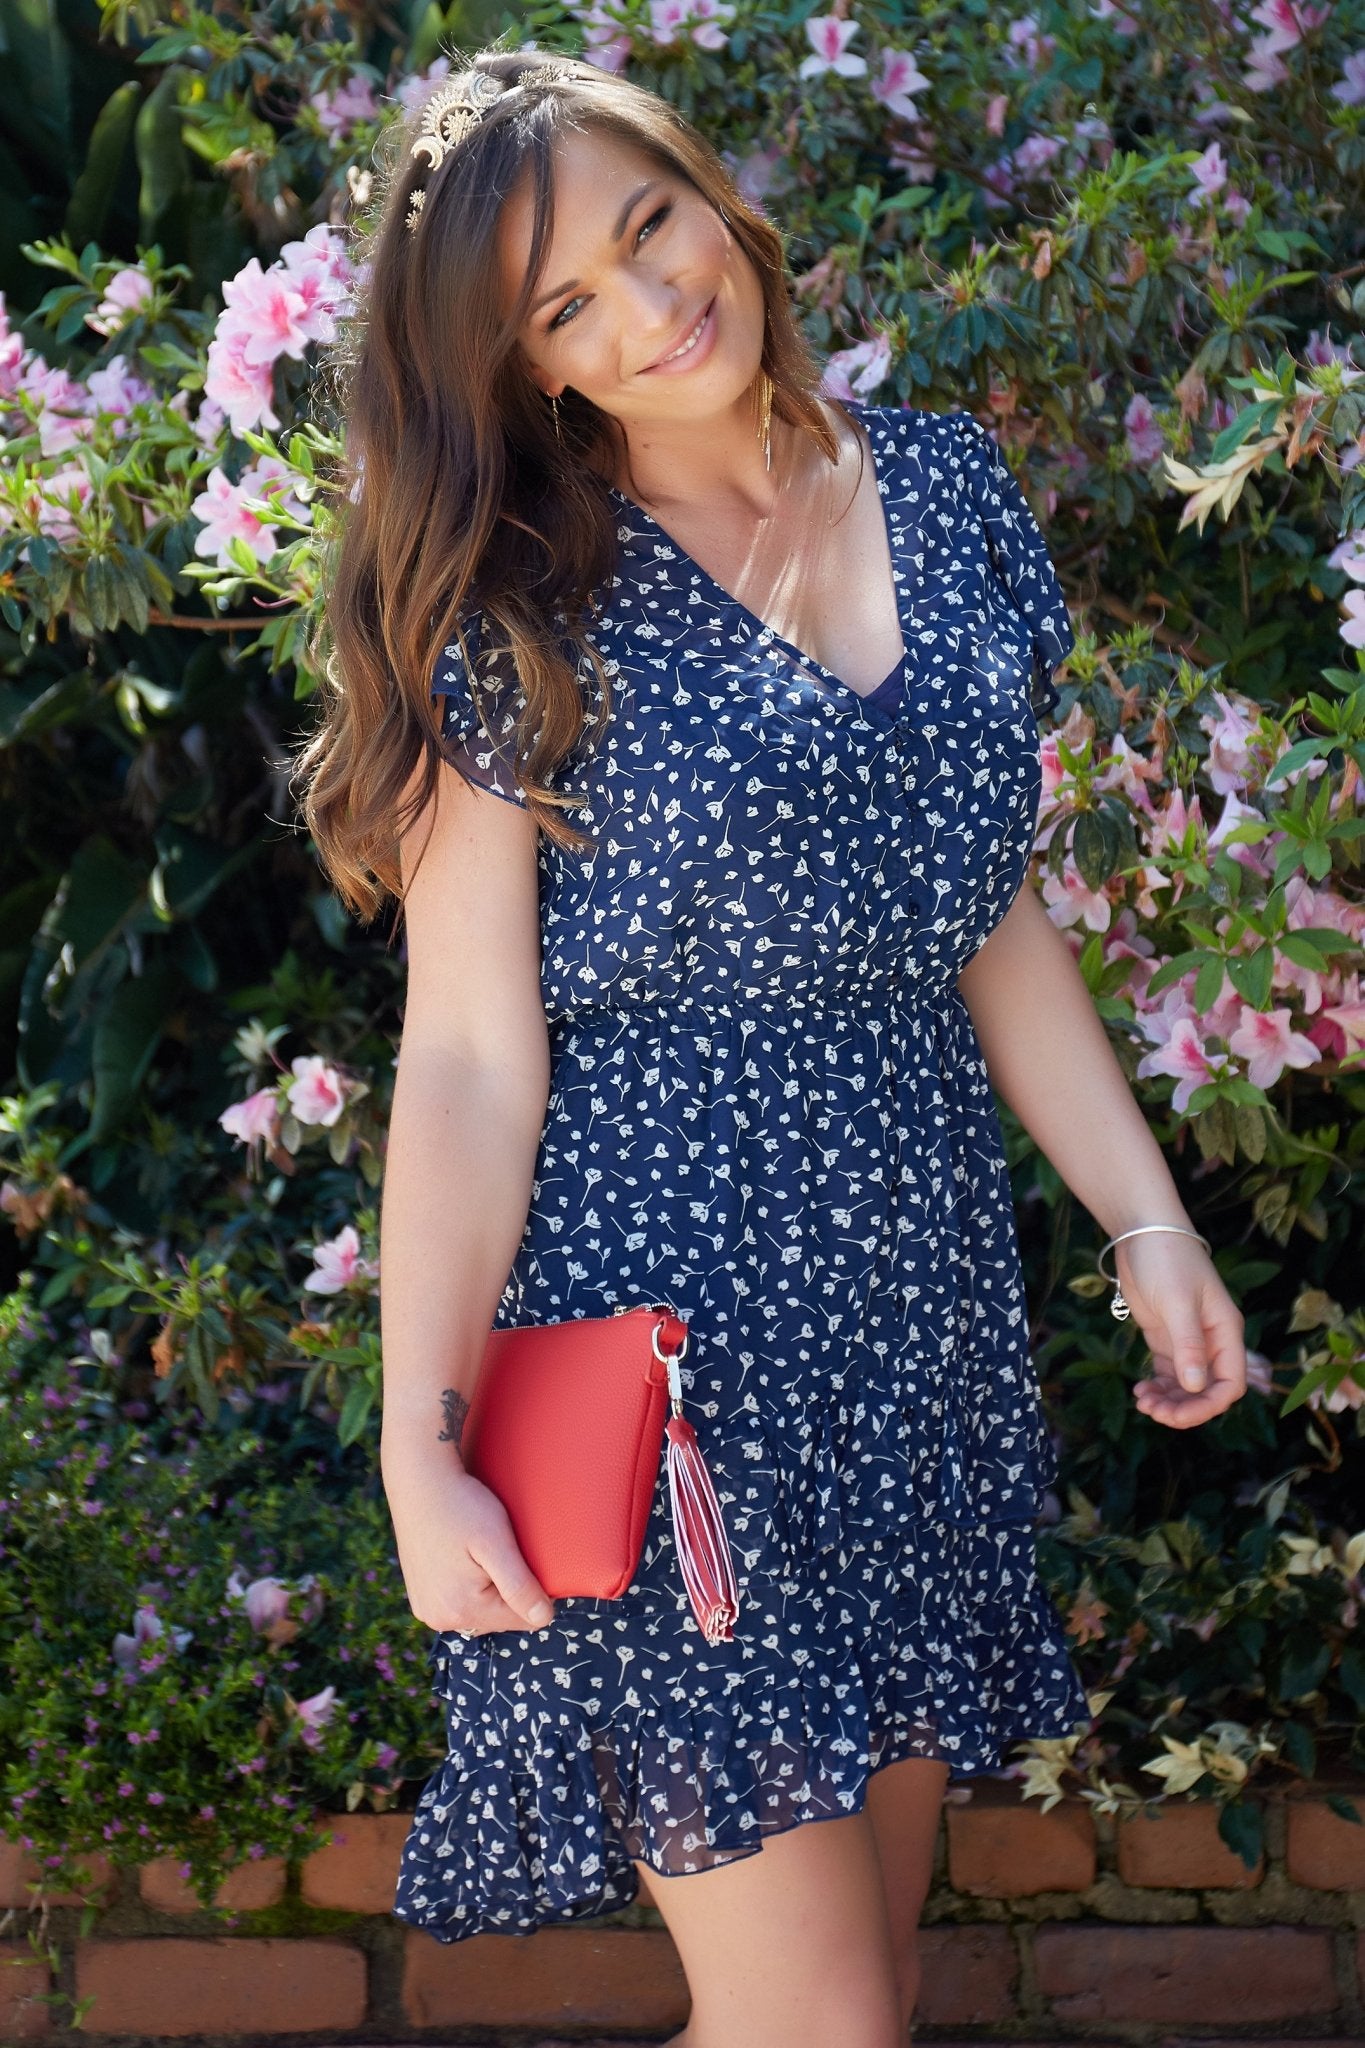 Fate + Becker Sunny Day Frilly Dress in Navy Print - Hey Sara